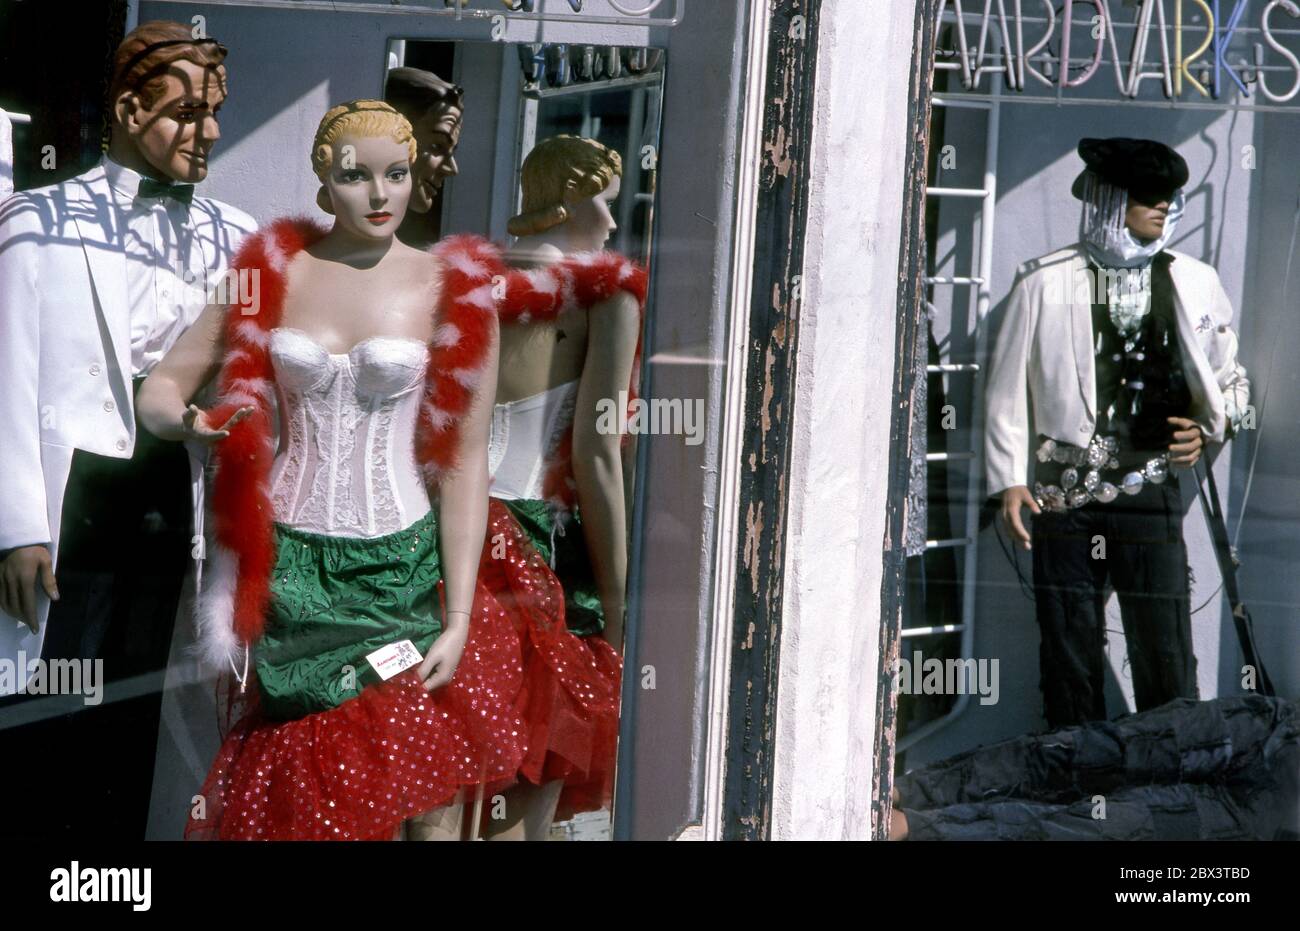 Display in storefront window at Aardvark's vintage clothing shop on Melrose Avenue in the West Hollywood neighborhood of Los Angeles circa 1980s. Stock Photo